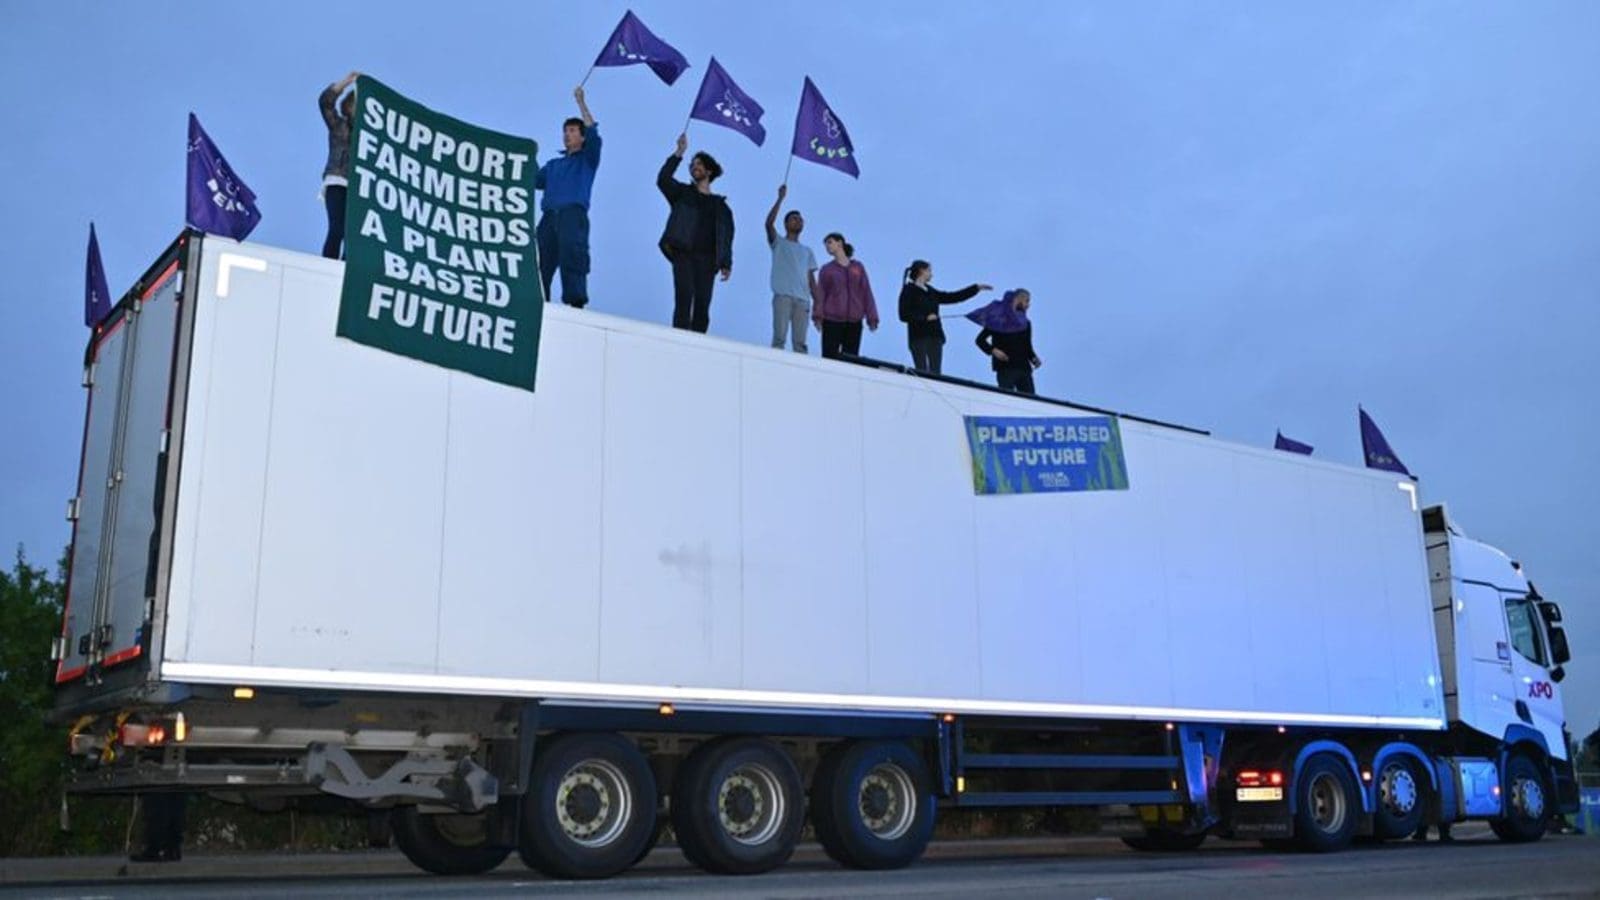 Animal Rebellion protests intensify, disrupt Müller Milk & Ingredients and Arla milk distribution operations